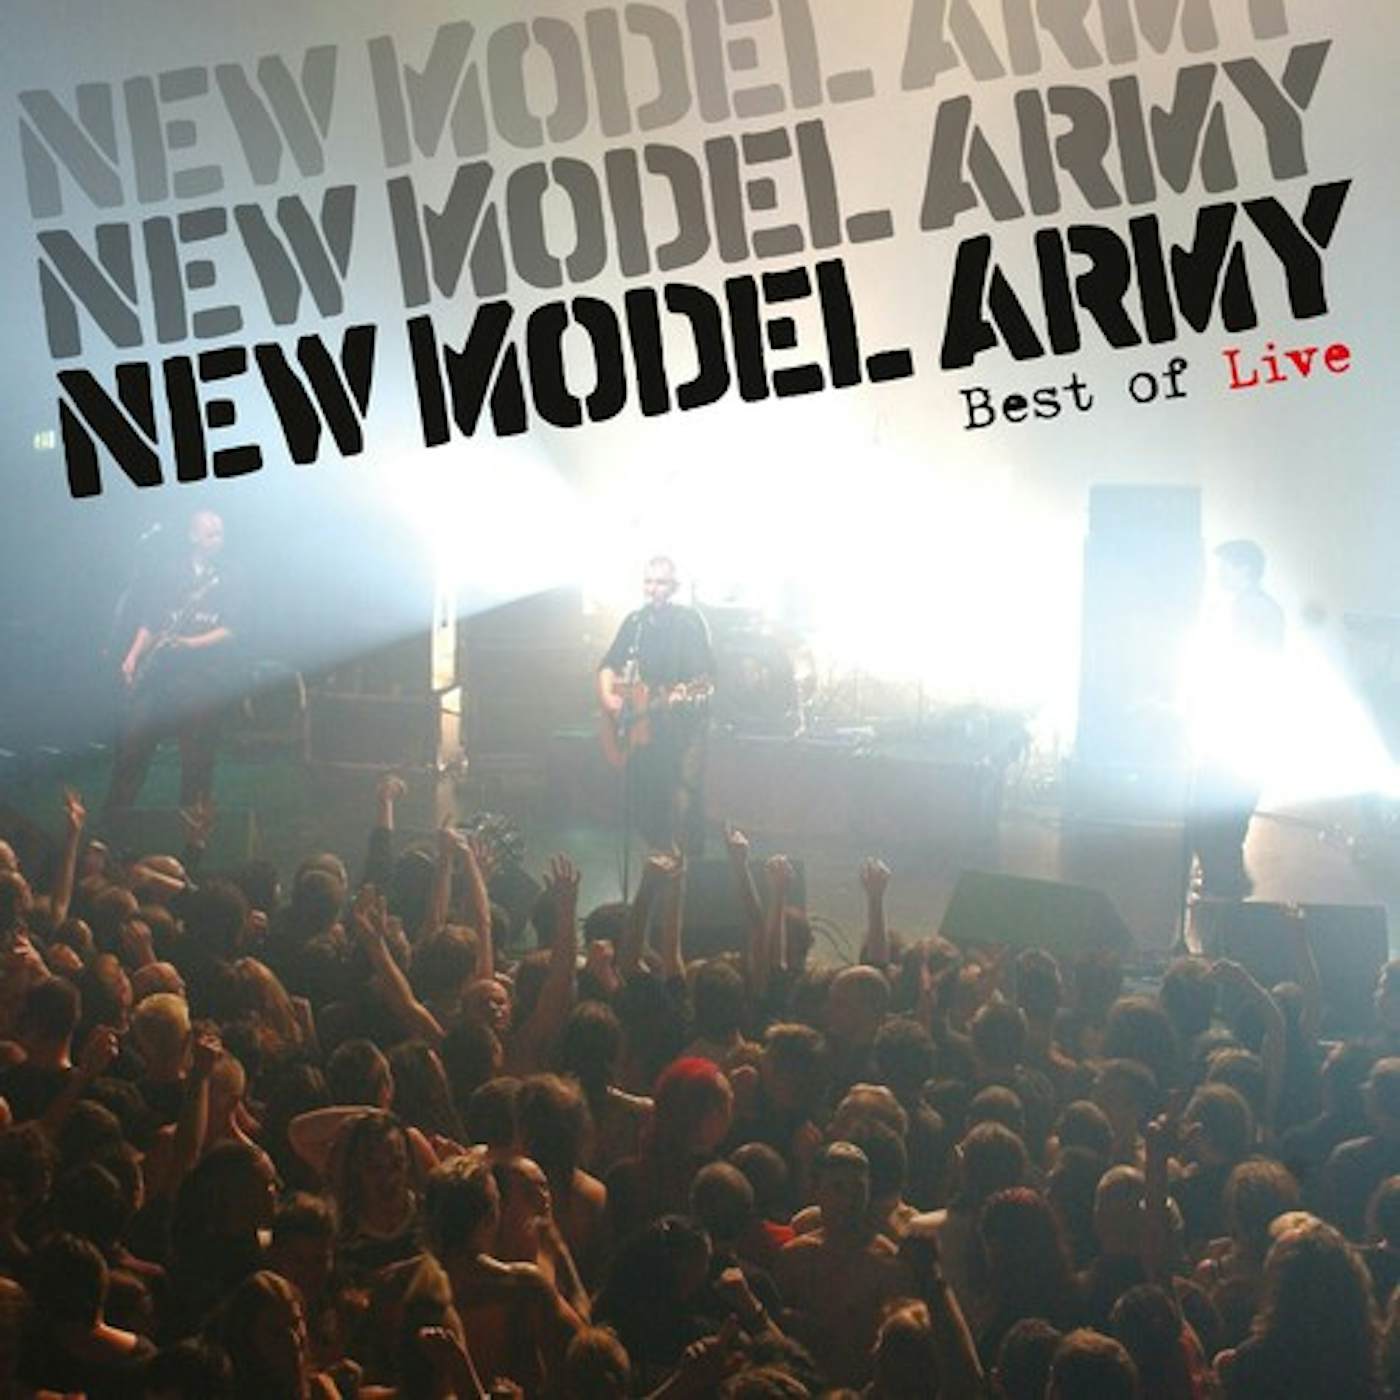 New Model Army BEST OF LIVE Vinyl Record